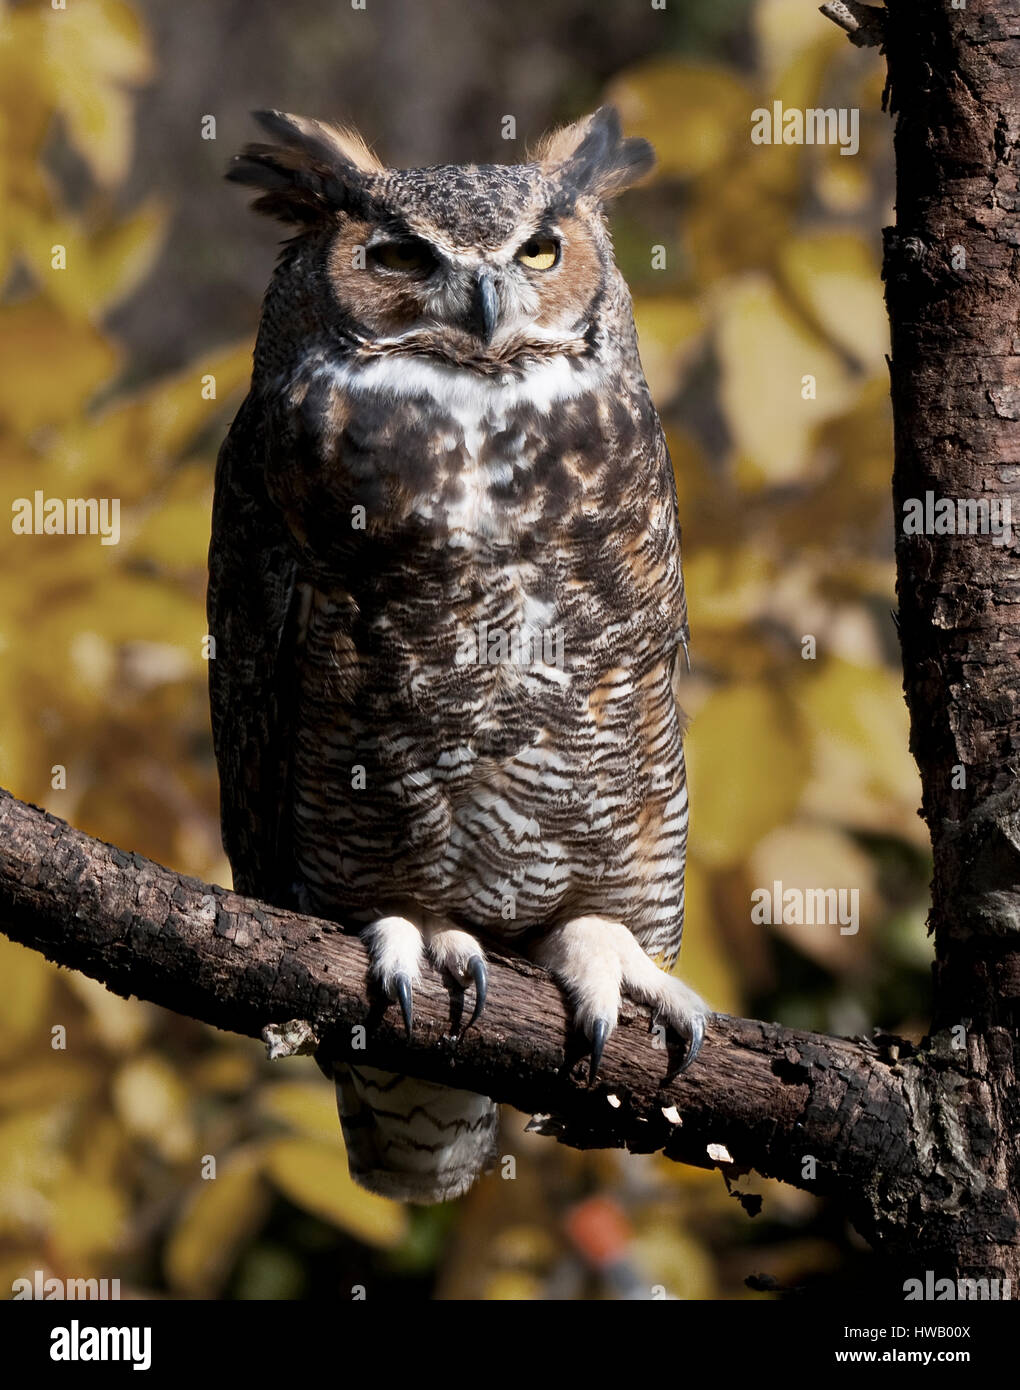 Howell Wildlife Nature Center Photo Shoot. All animals and birds were saved and unable to take care of themselves in the wild.Great Horned Owl is a la Stock Photo